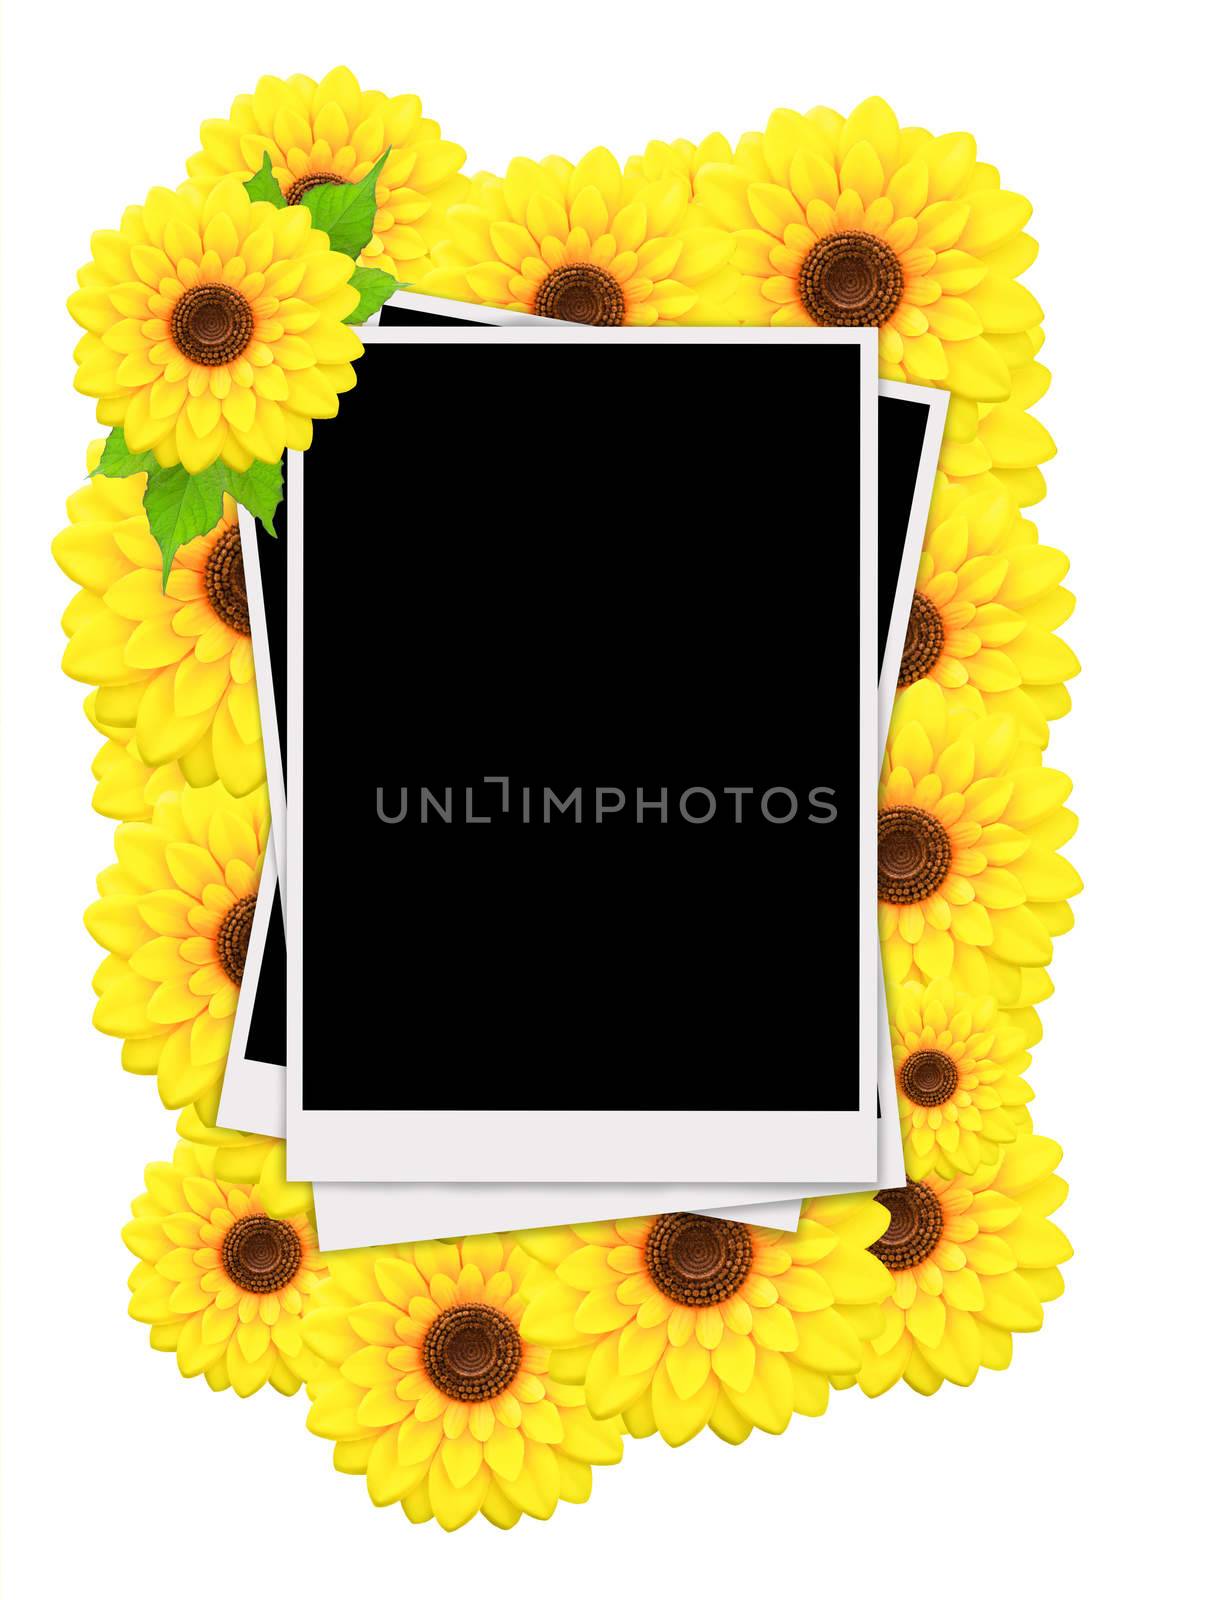 Empty instant photos and sunflowers on white background